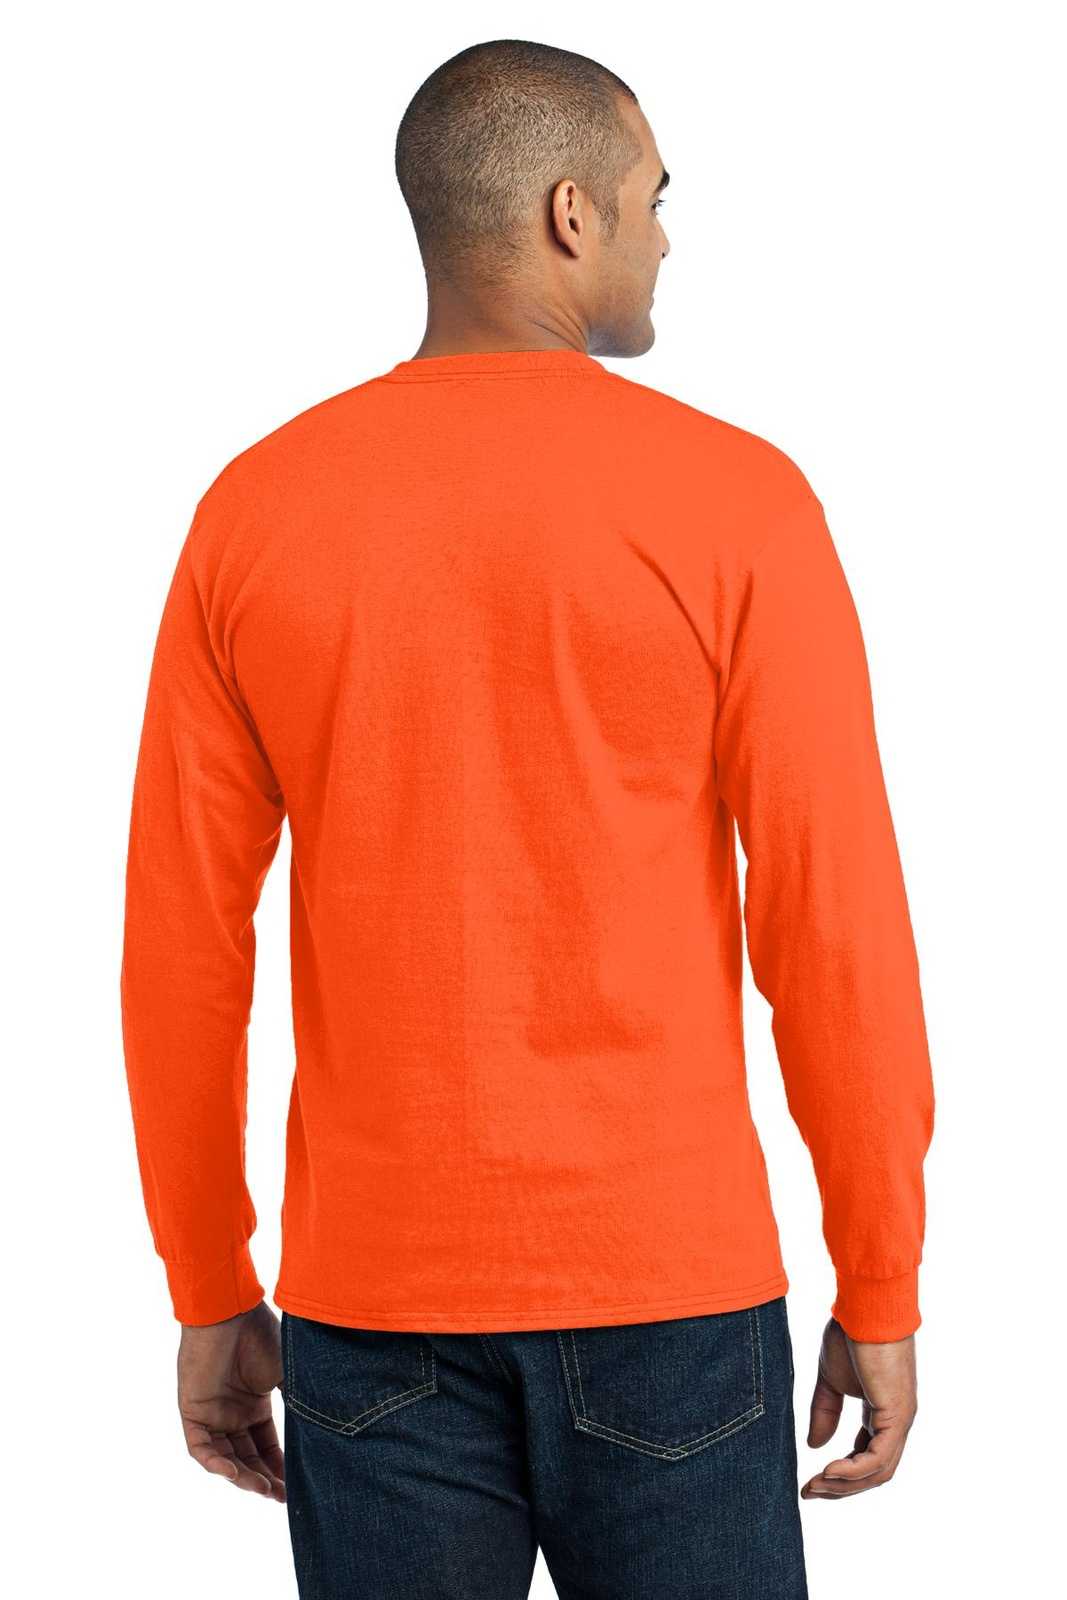 Port & Company PC55LS Long Sleeve Core Blend Tee - Safety Orange - HIT a Double - 1